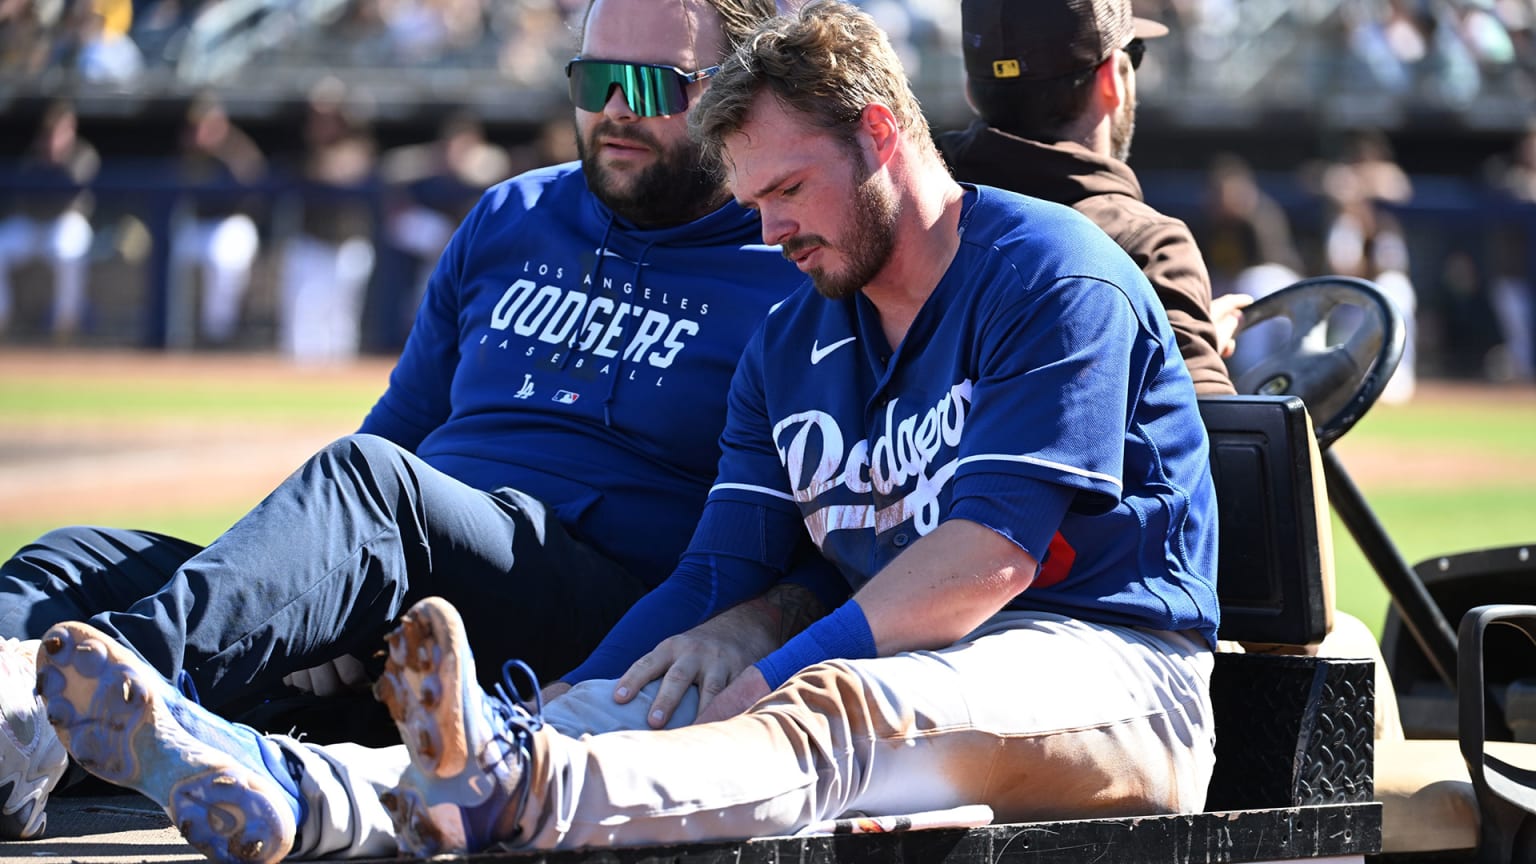 Dodgers Improbable Baseball on X: Gavin Lux emotional interview on Freak  torn ACL injury, fights tears on Los Angeles Dodgers Shortstop Dream 😭 We  are rooting for you always Gavin 🙏 we